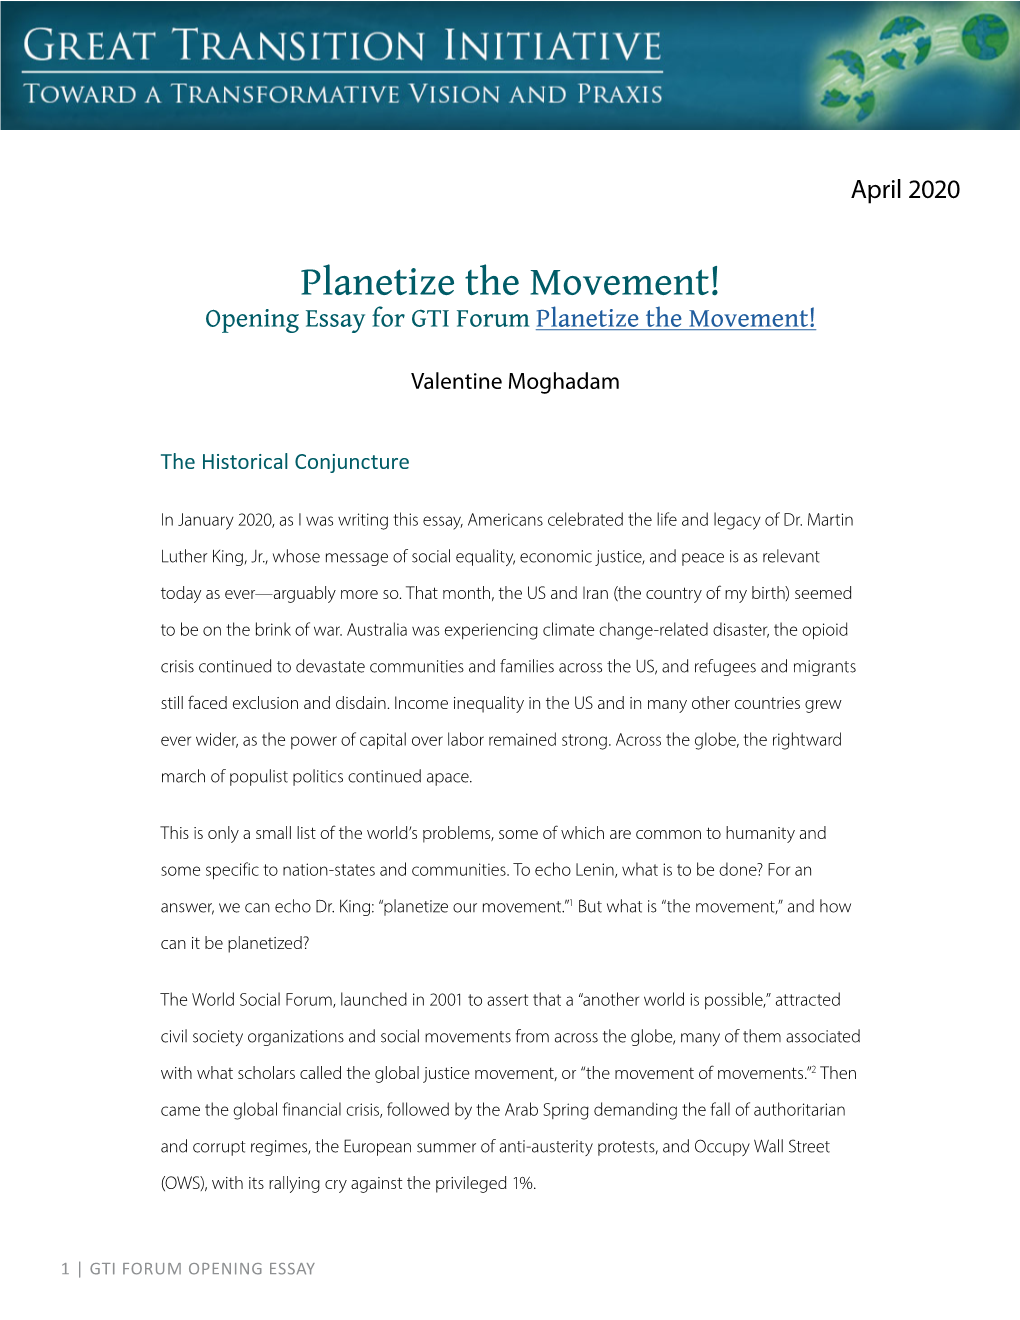 Opening Essay for GTI Forum Planetize the Movement!